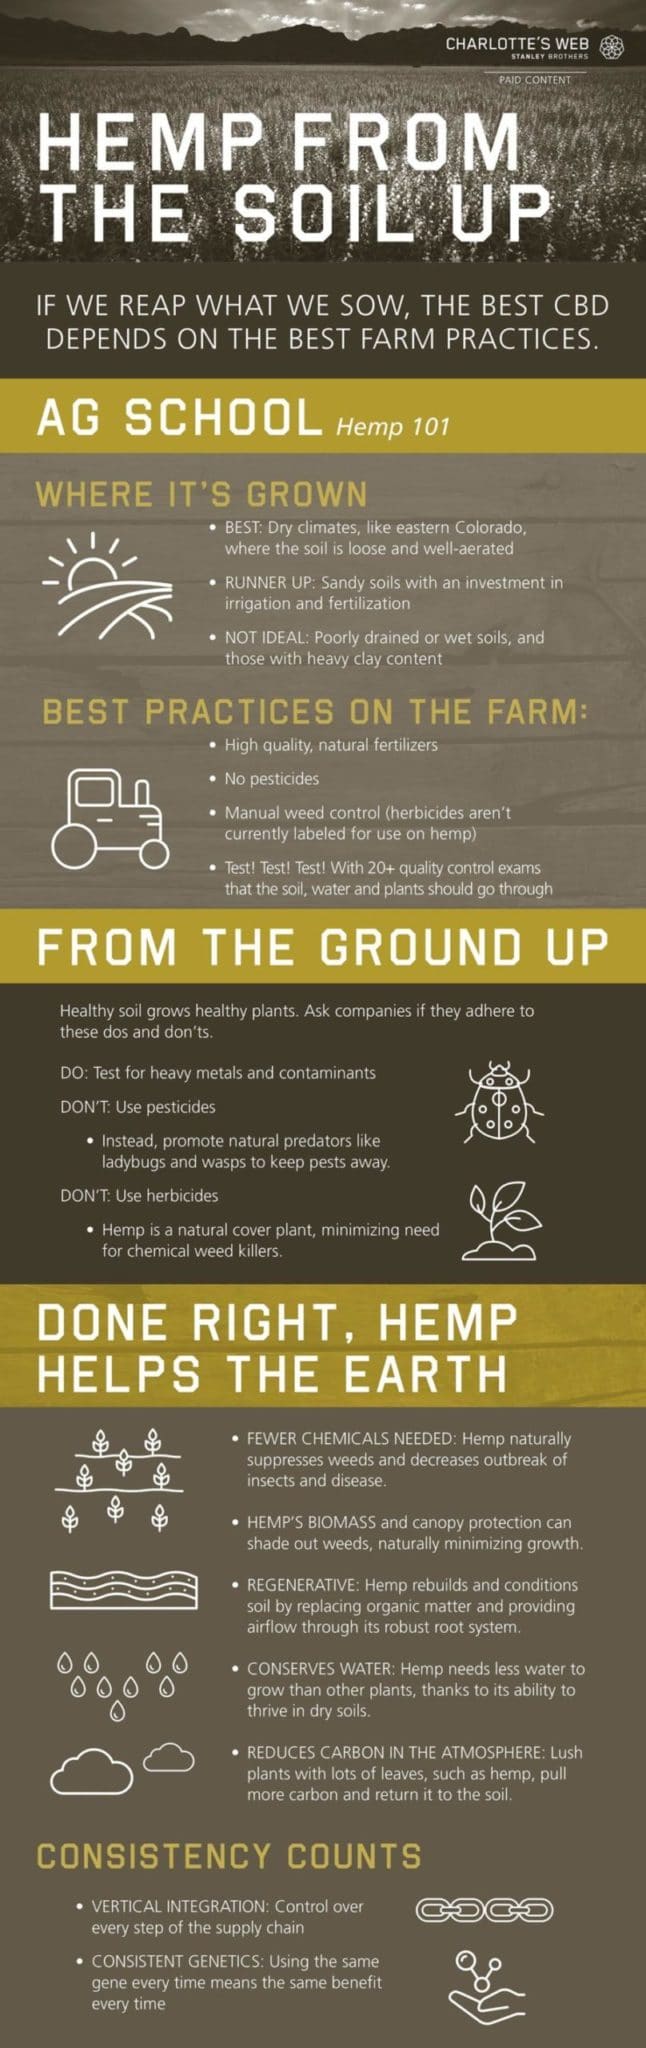 Charlotte's Web Infographic - Hemp From The Soil Up